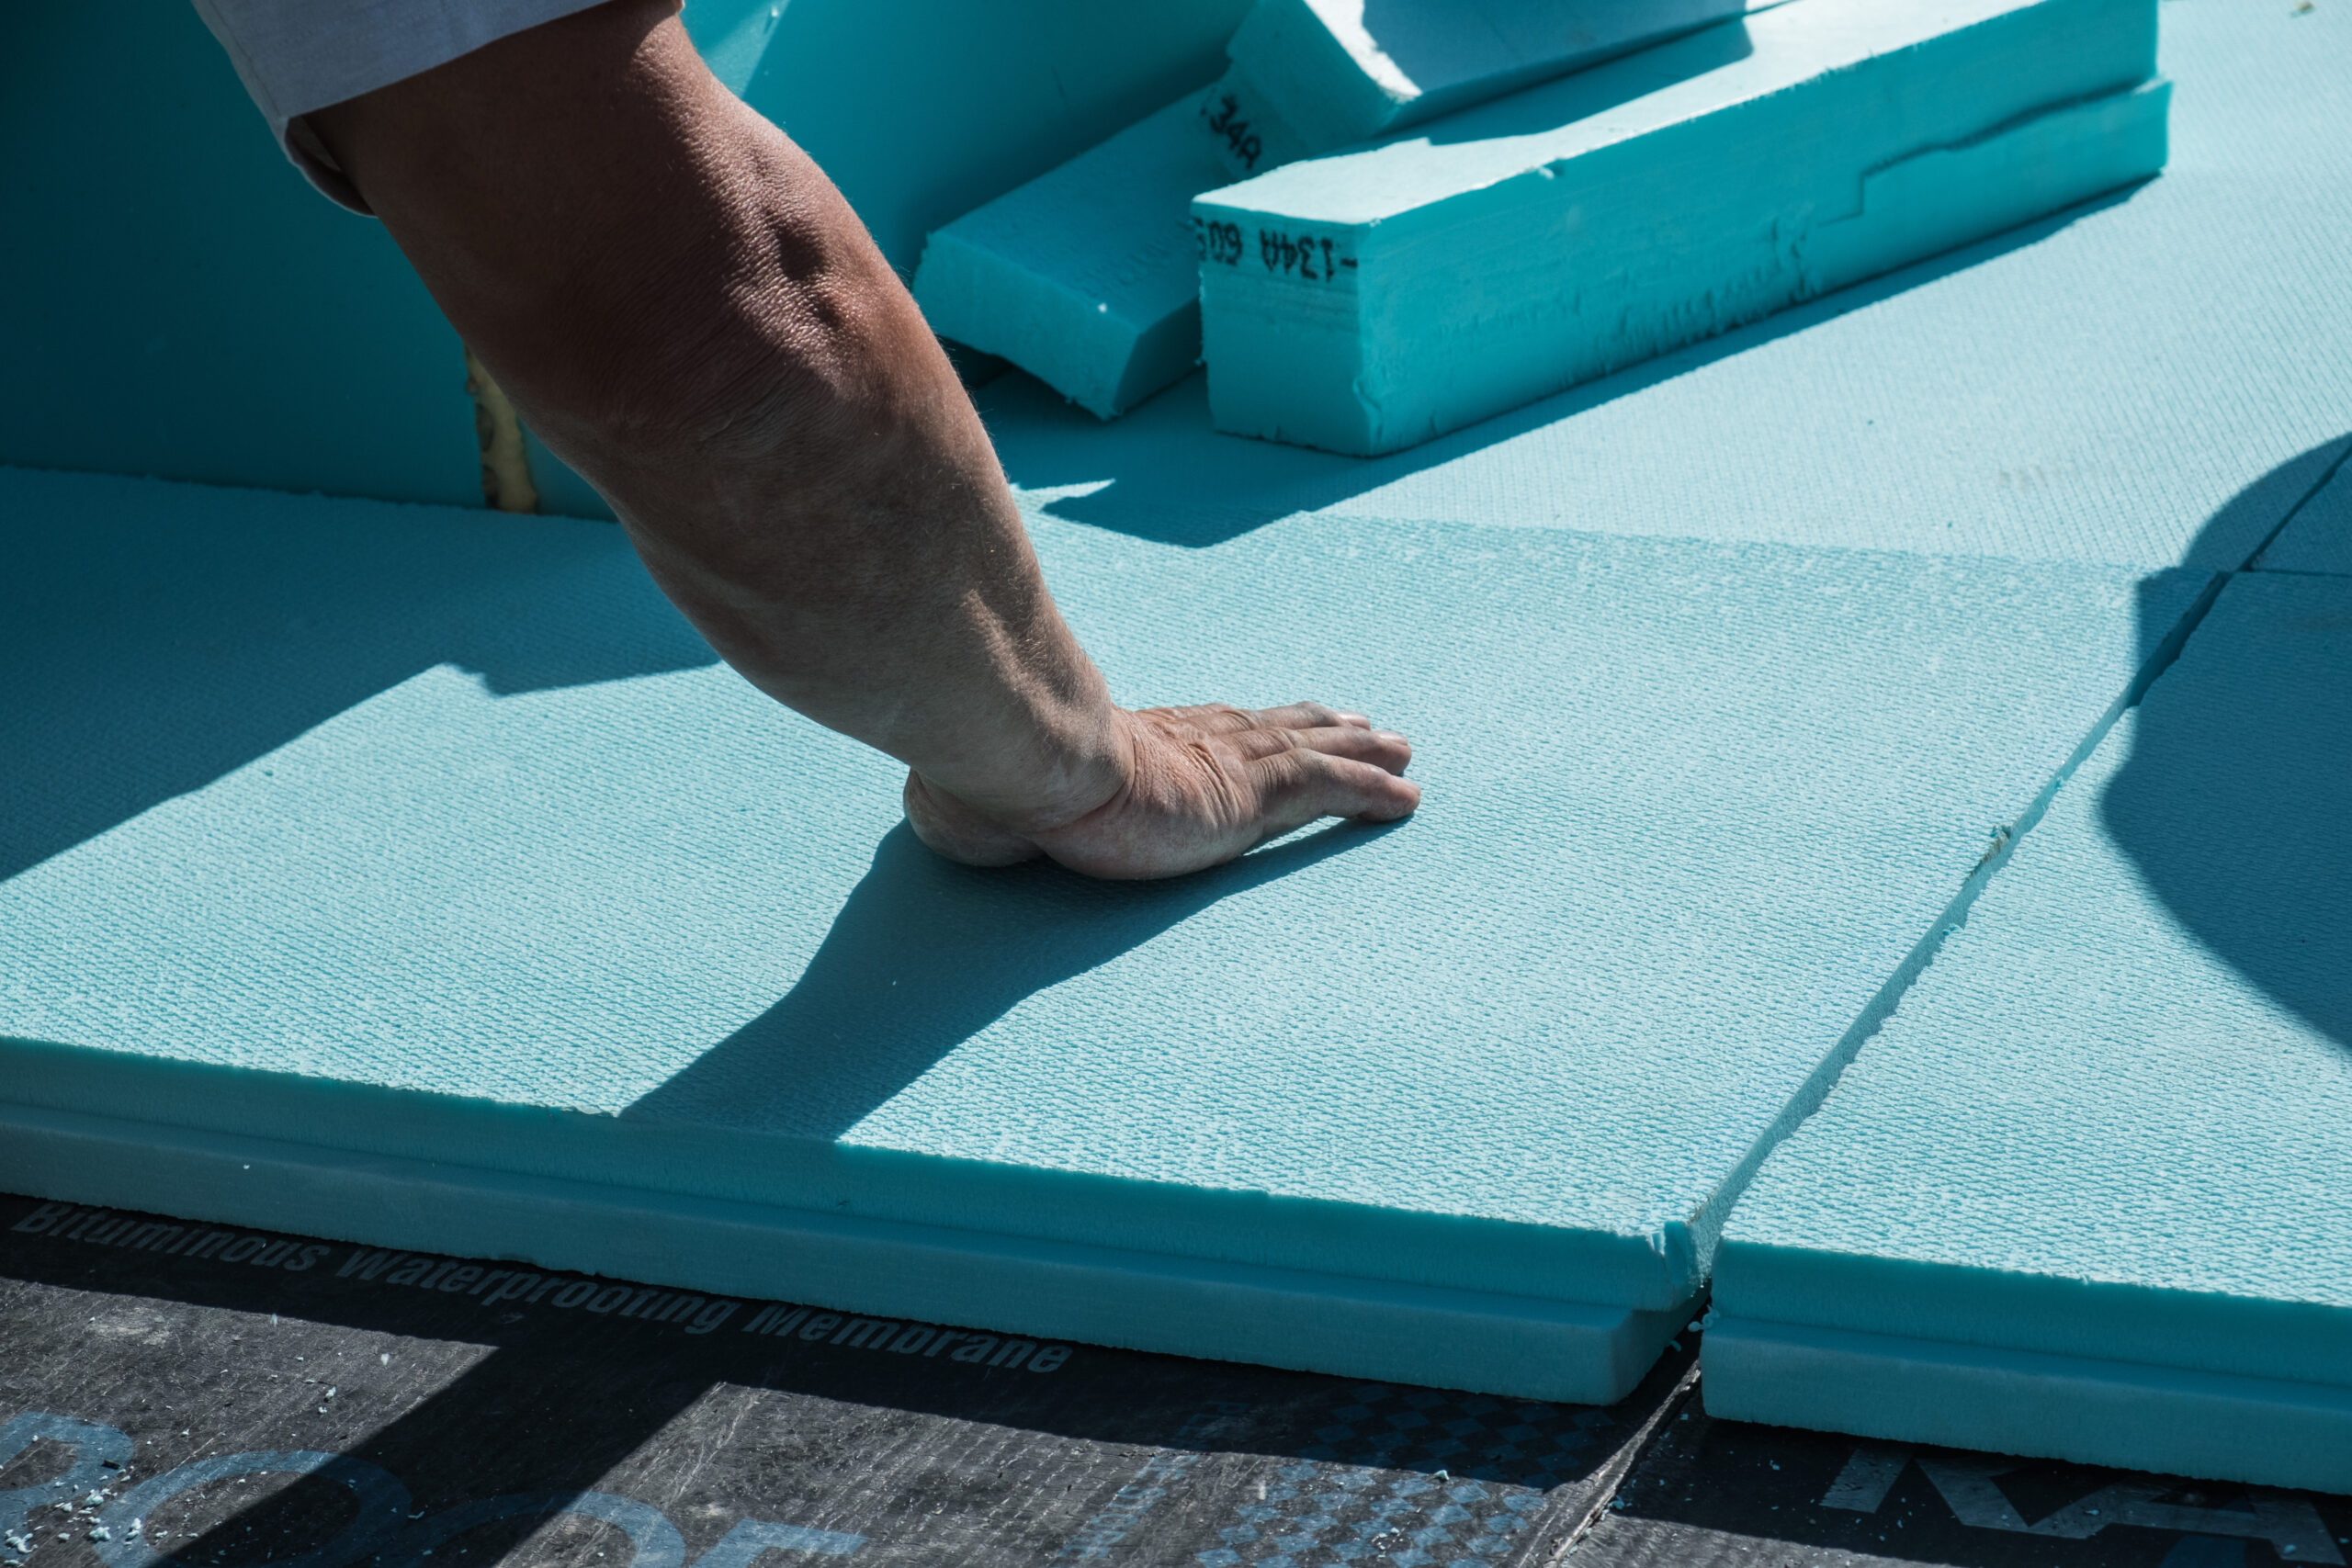 A roofer installs blue XPS polystyrene insulation boards on a flat roof